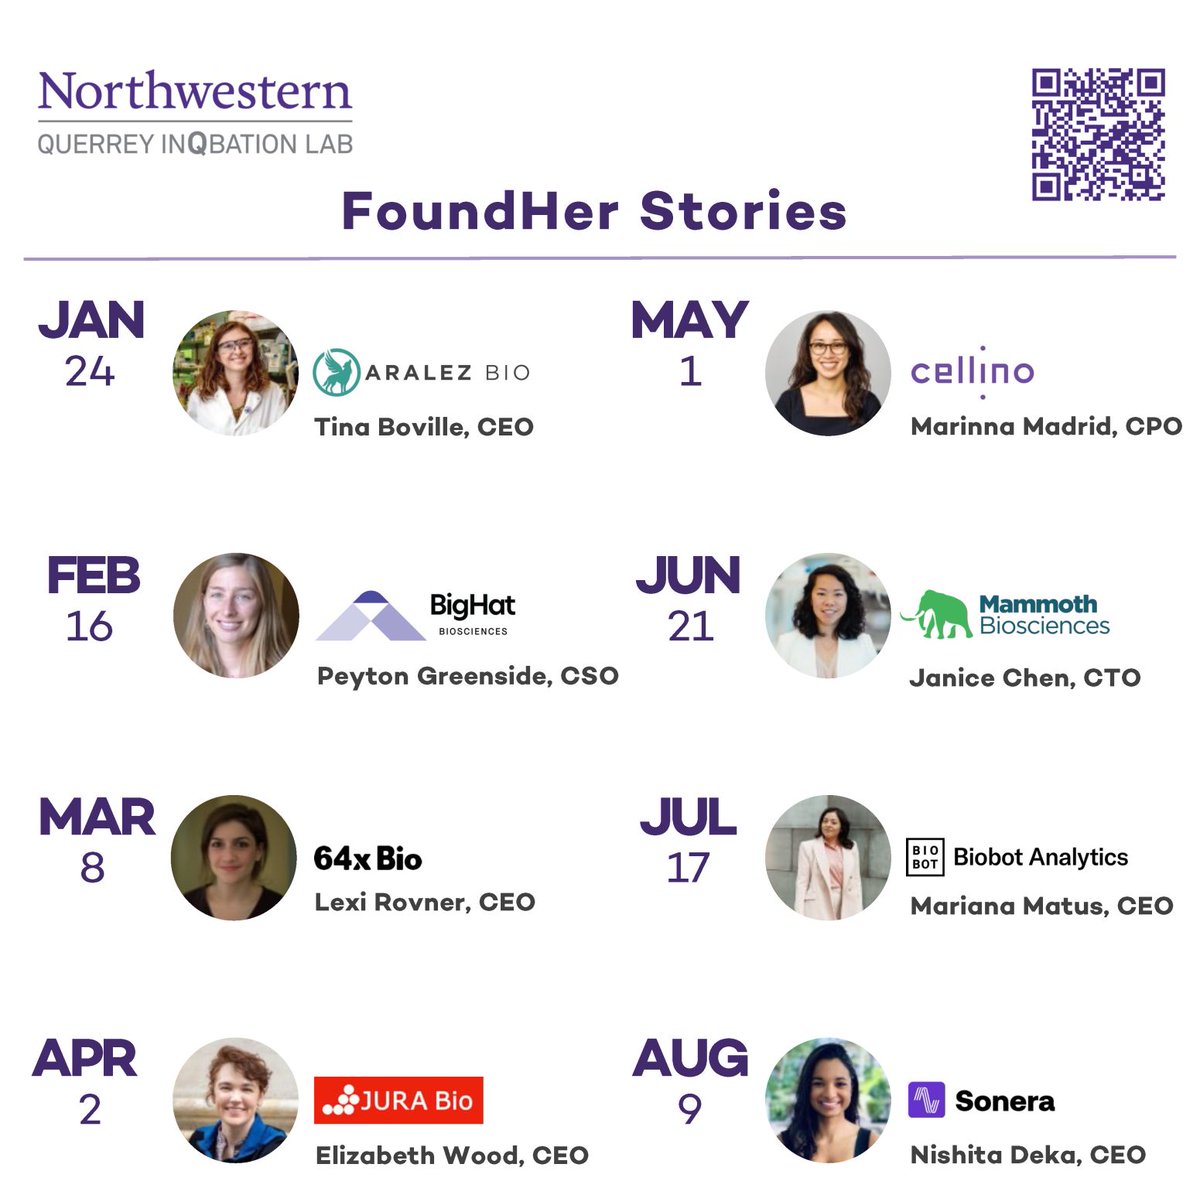 🗓️ Join us for the @NorthwesternU Querrey InQbation Lab's FoundHer Series featuring @MadridMarinna, our Co-Founder on 5/1 at 2pm EDT! Learn about Marinna's #startup journey & @CellinoBio's scalable biomanufacturing platform for personalized #regenmed here: bit.ly/3TFU4hy